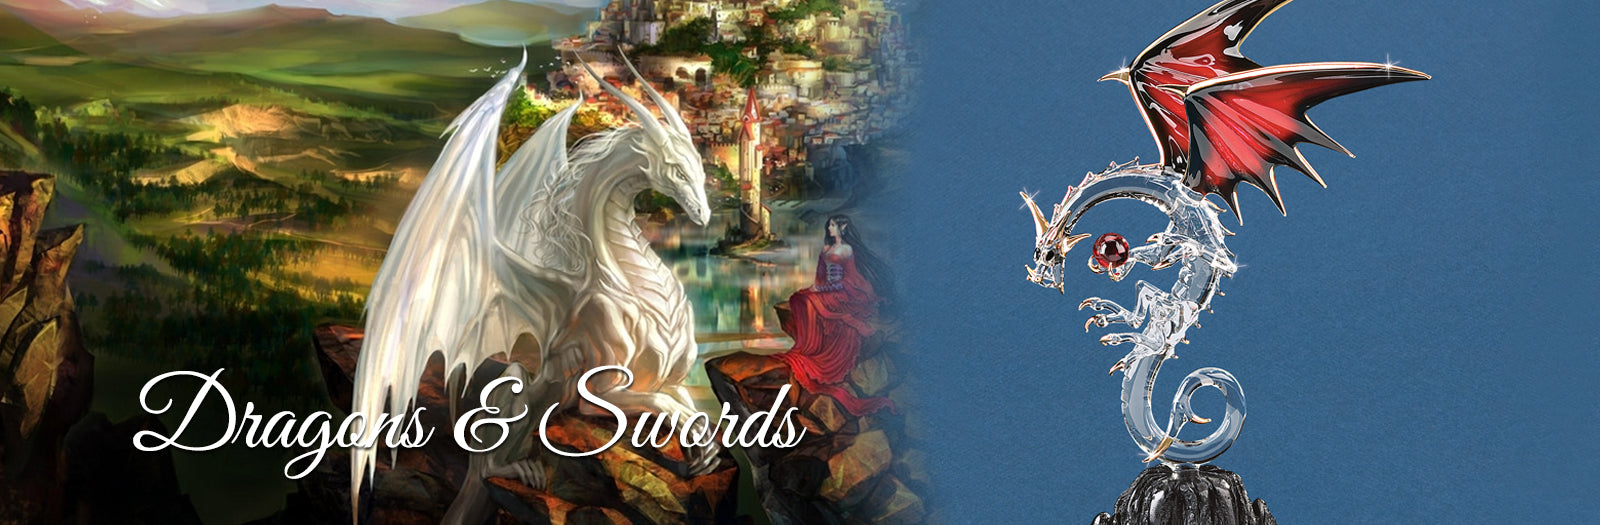 Shop mystical legends with this collection of handcrafted glass art dragons and swords.